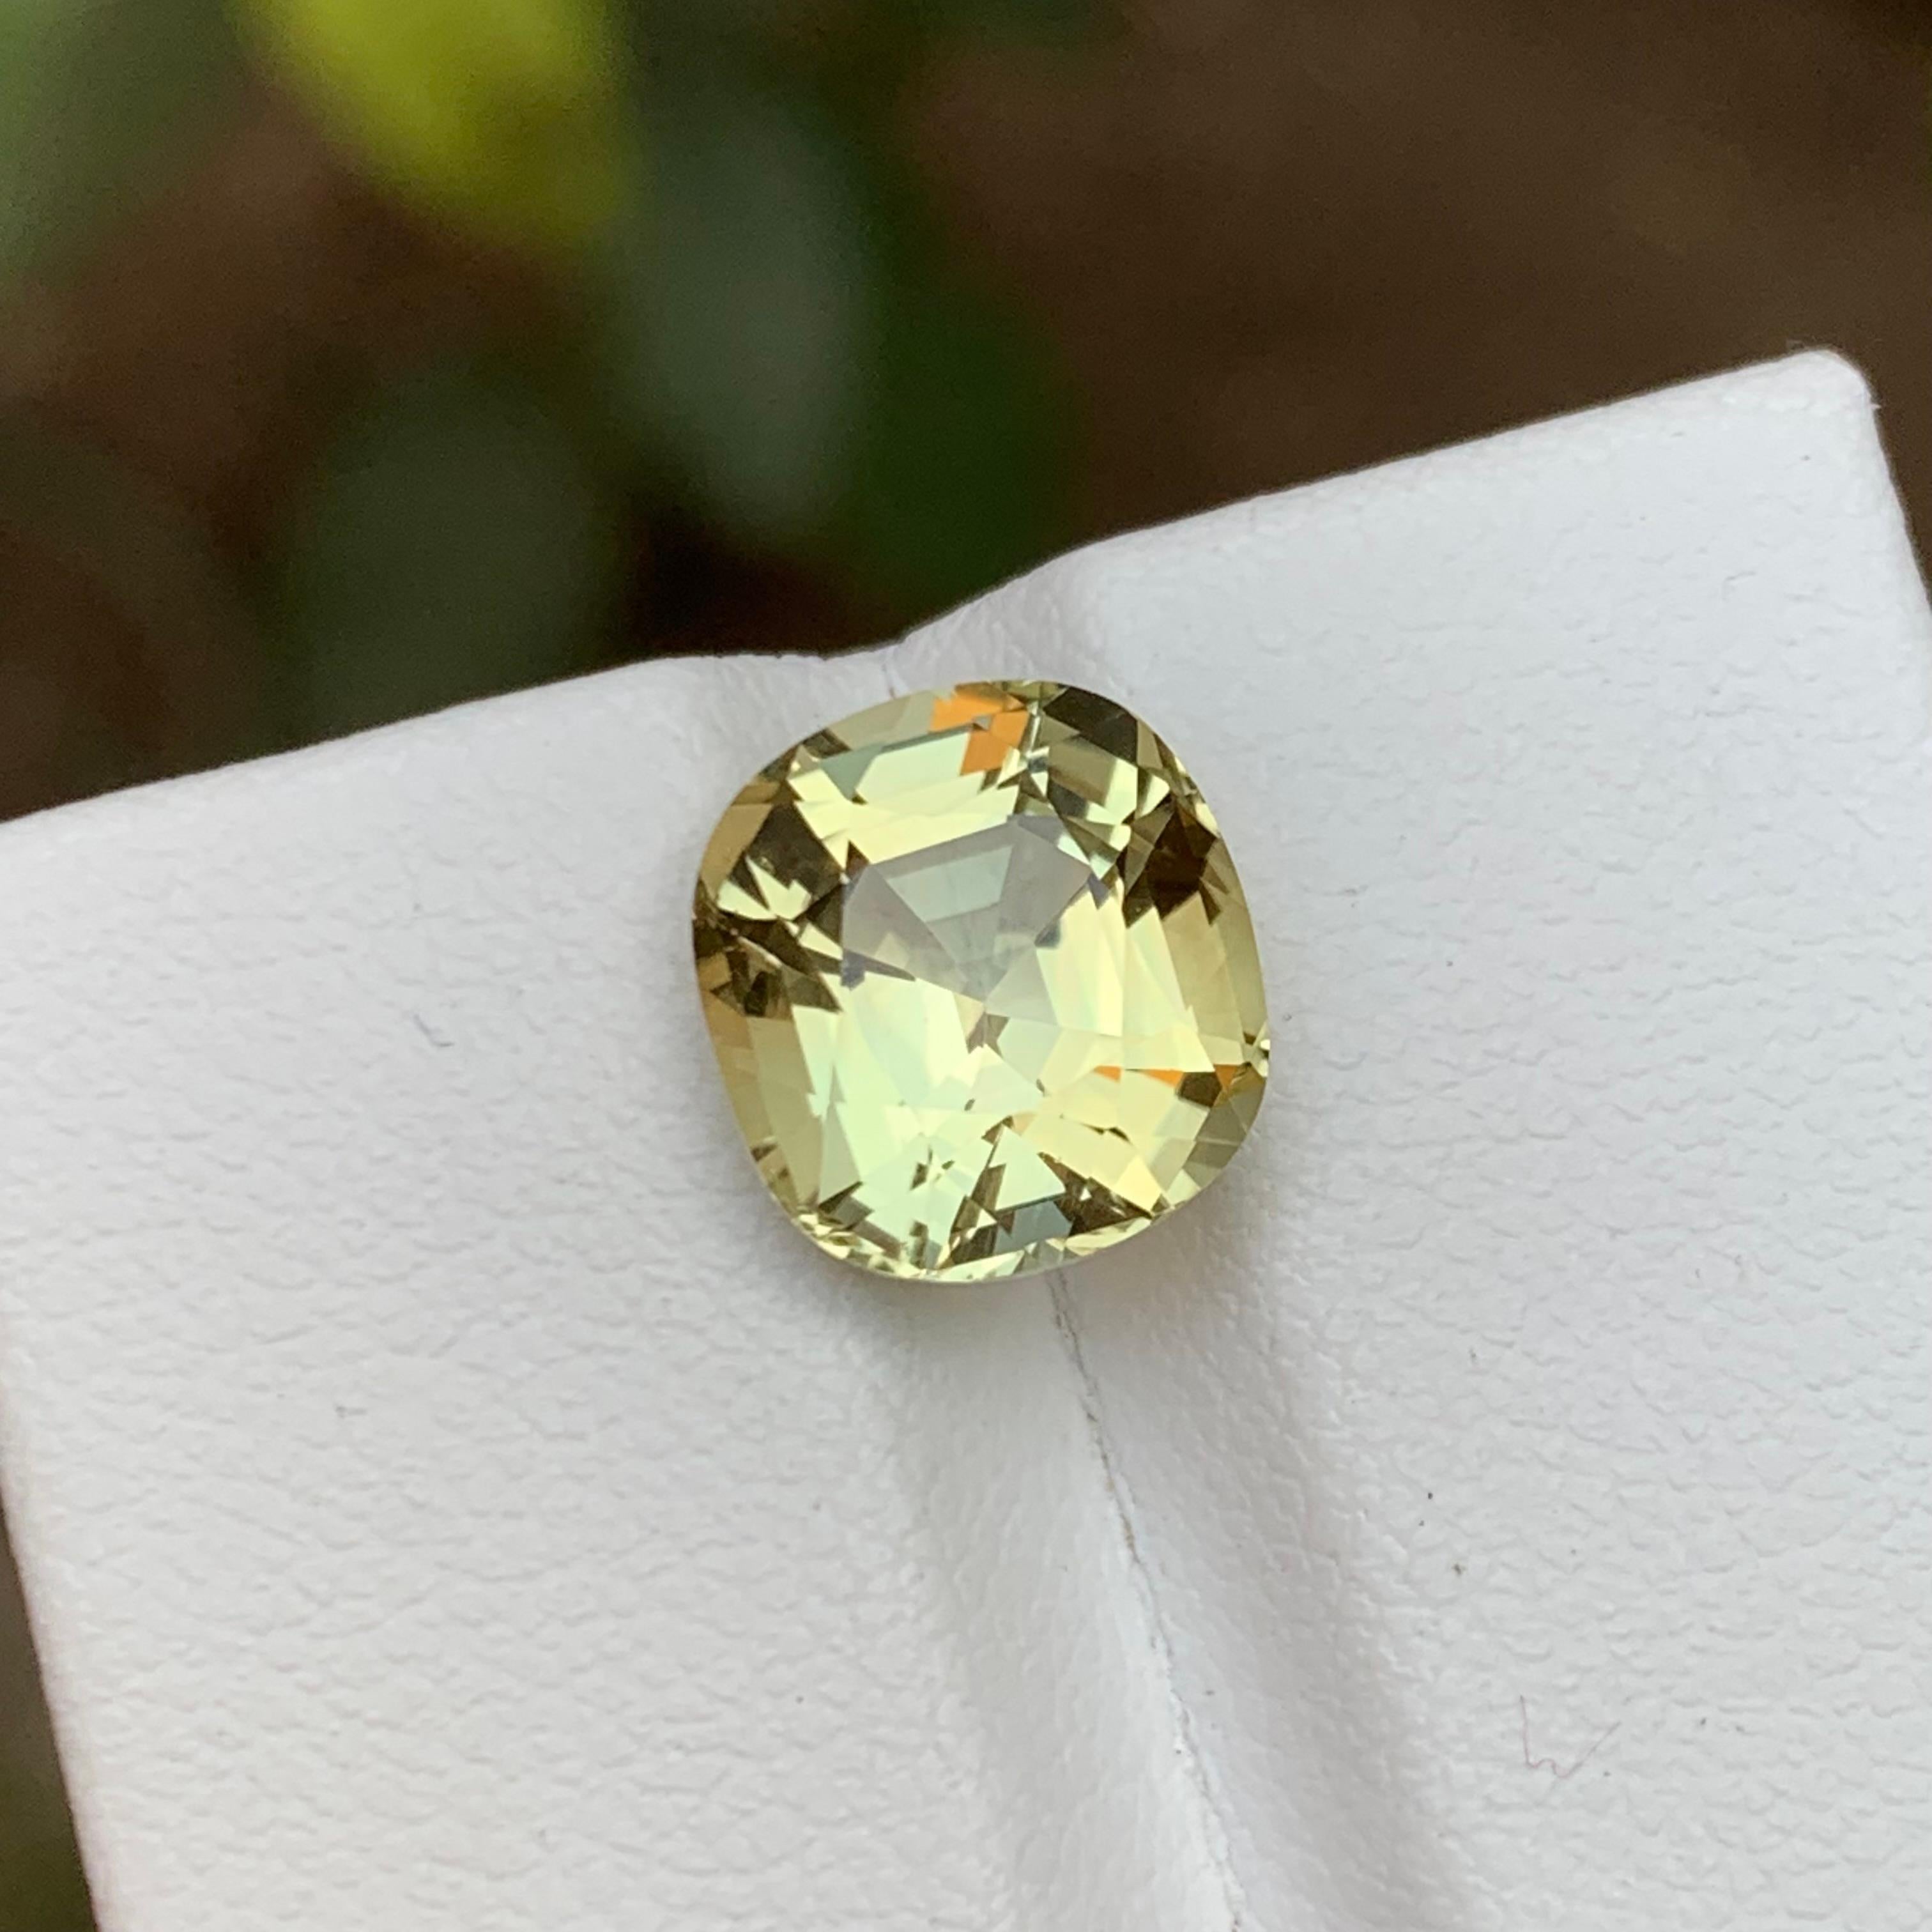 Contemporary Rare Light Golden Yellow Natural Tourmaline Gemstone 4.15Ct Cushion Cut for Ring For Sale